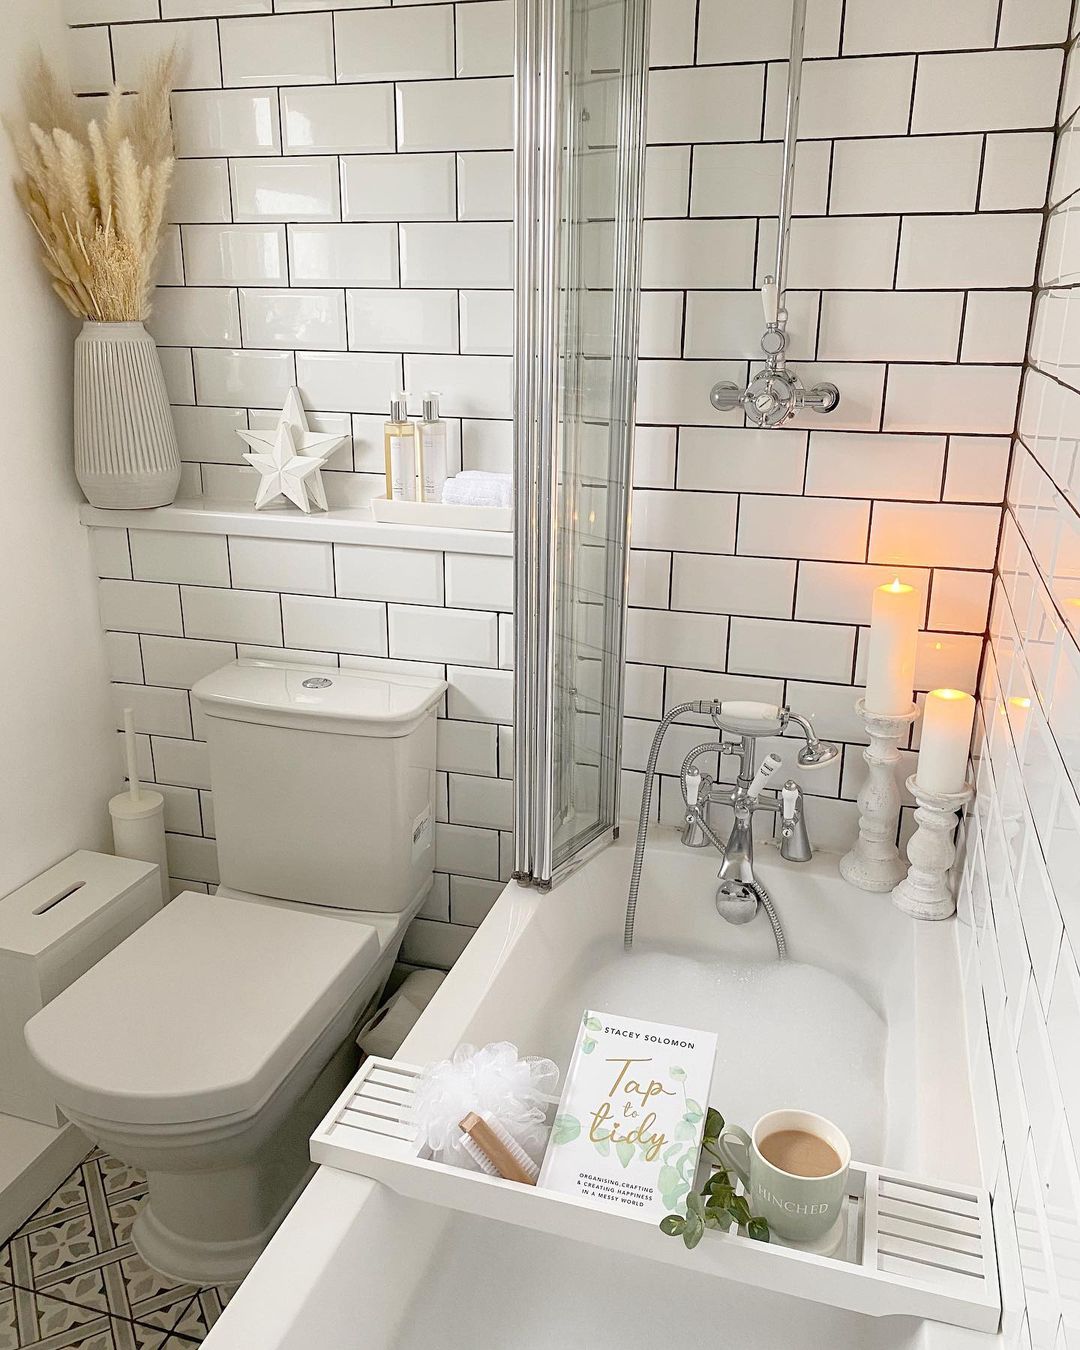 Maximize Small Space with a Functional Bathtub Tray